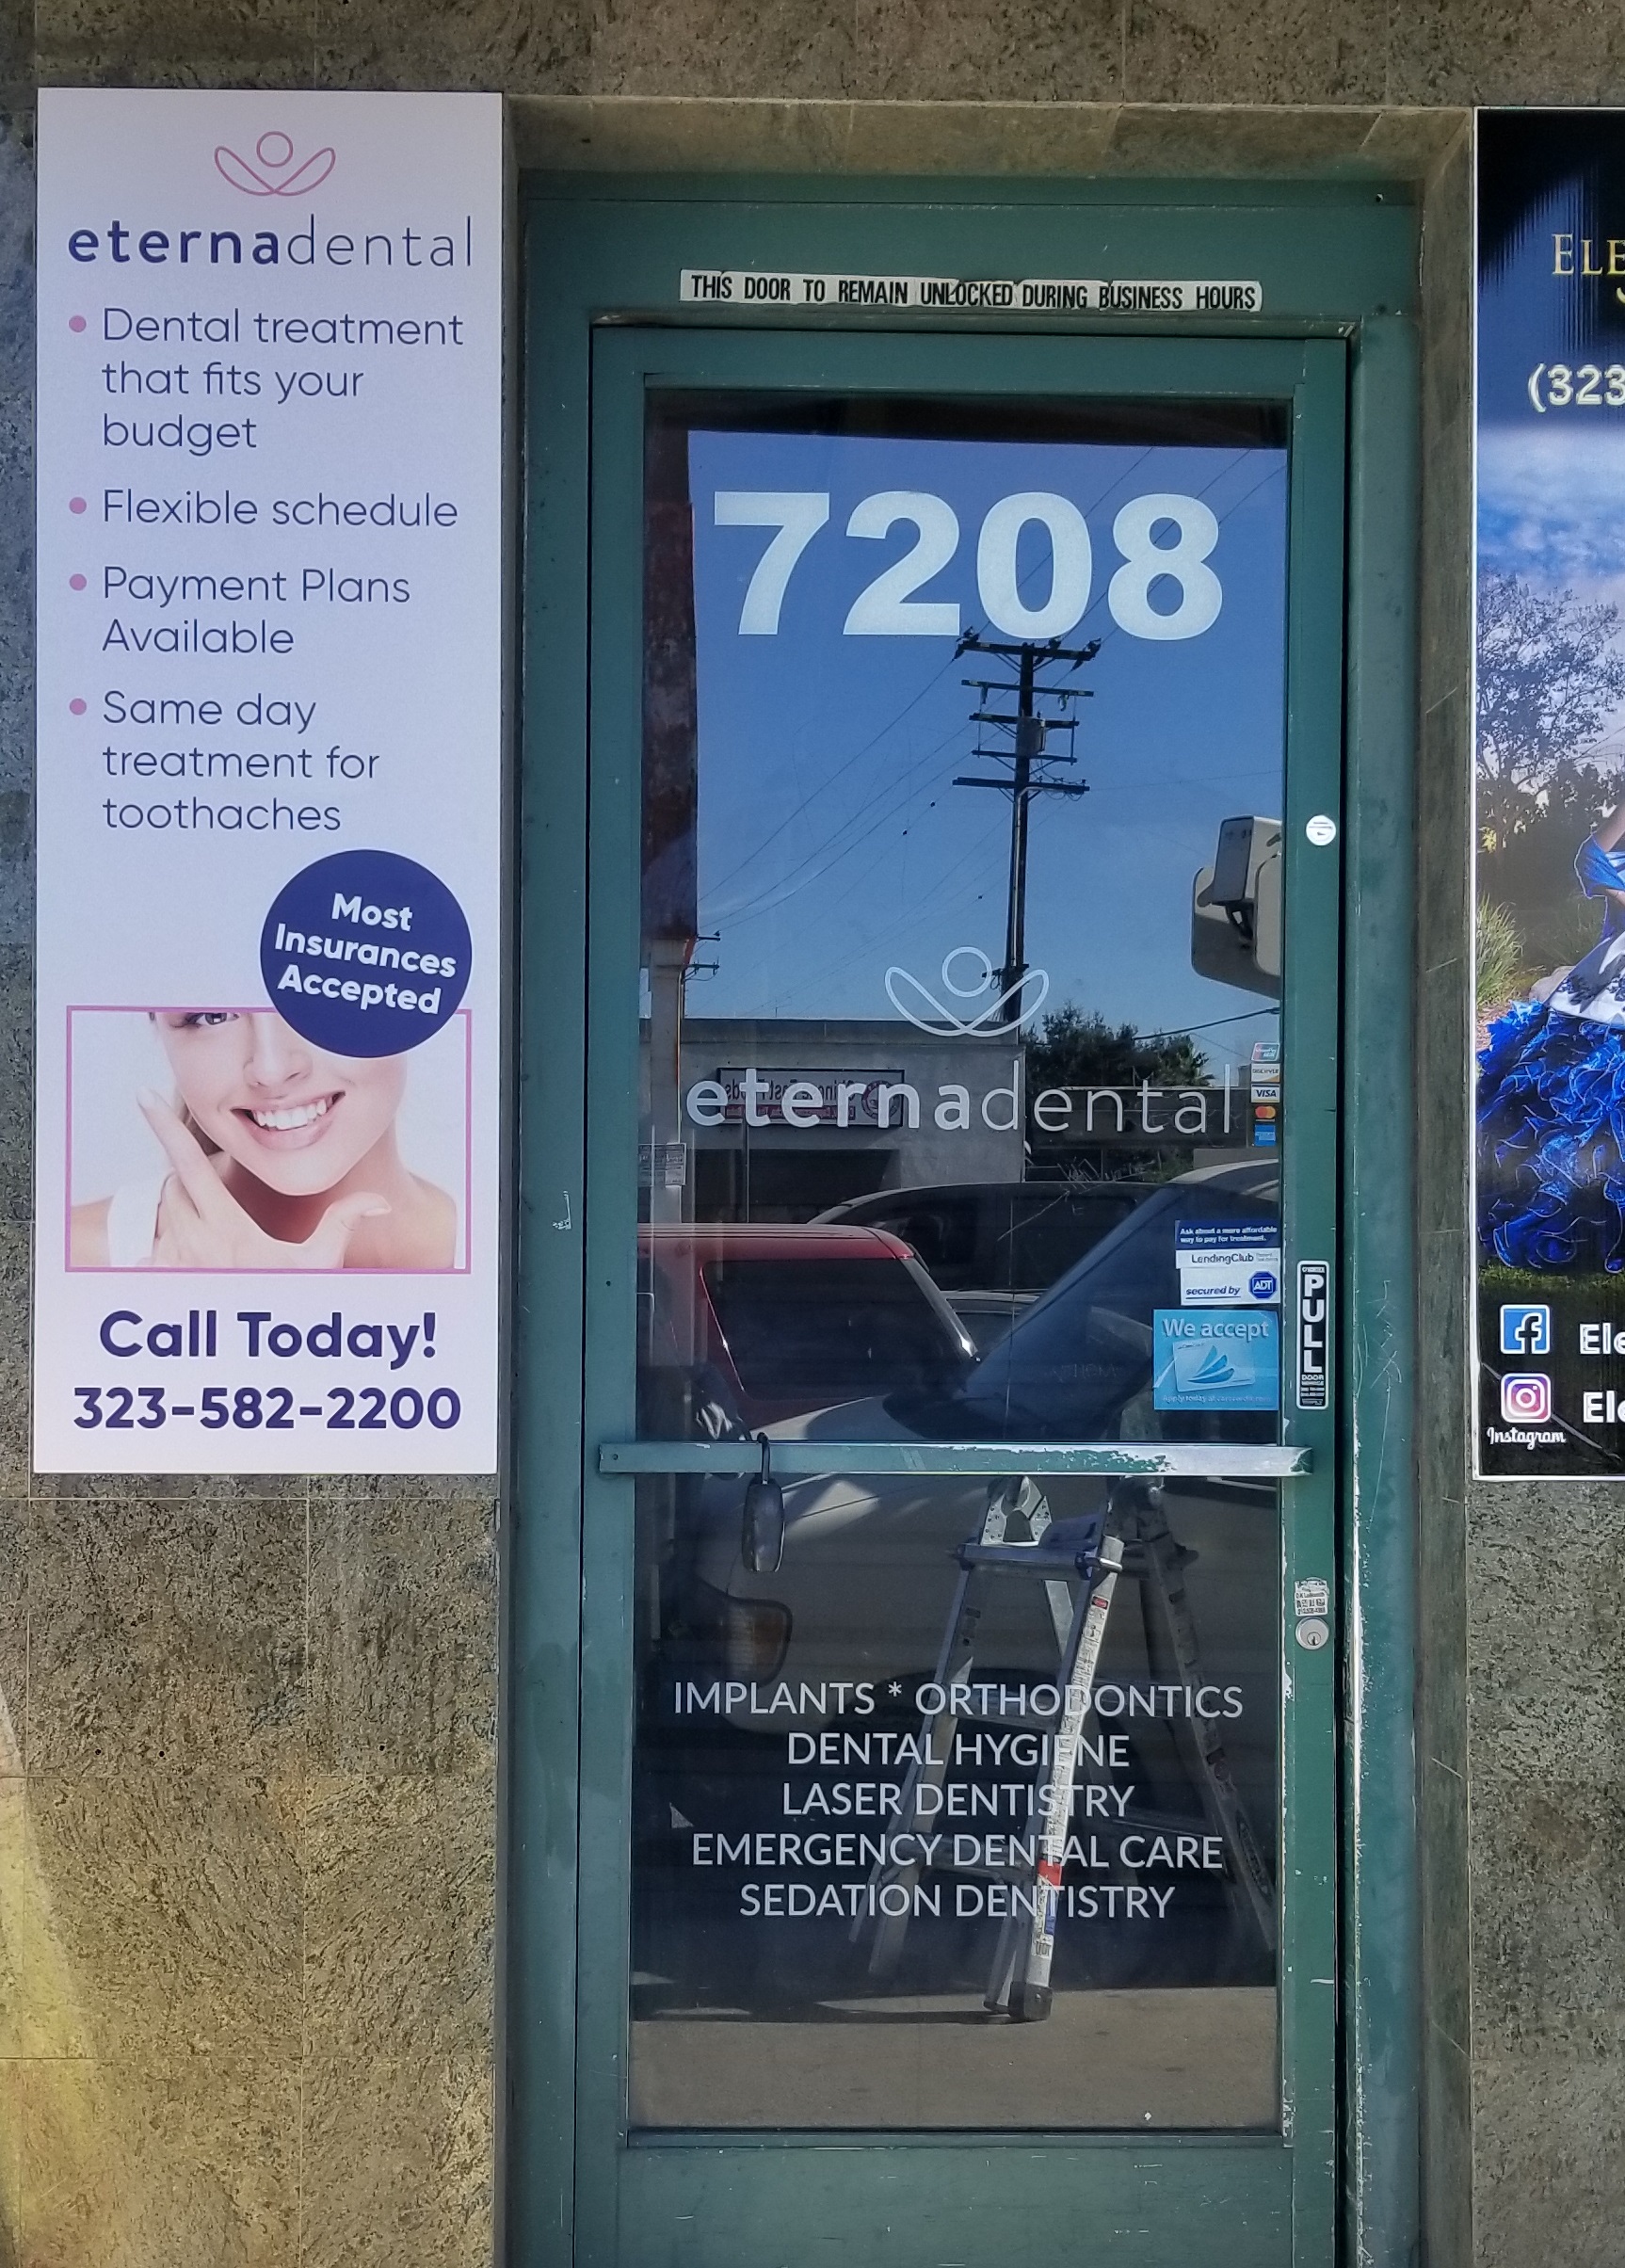 These are the custom door signage we made for Eternadental in Huntington Park as part of their sign package.